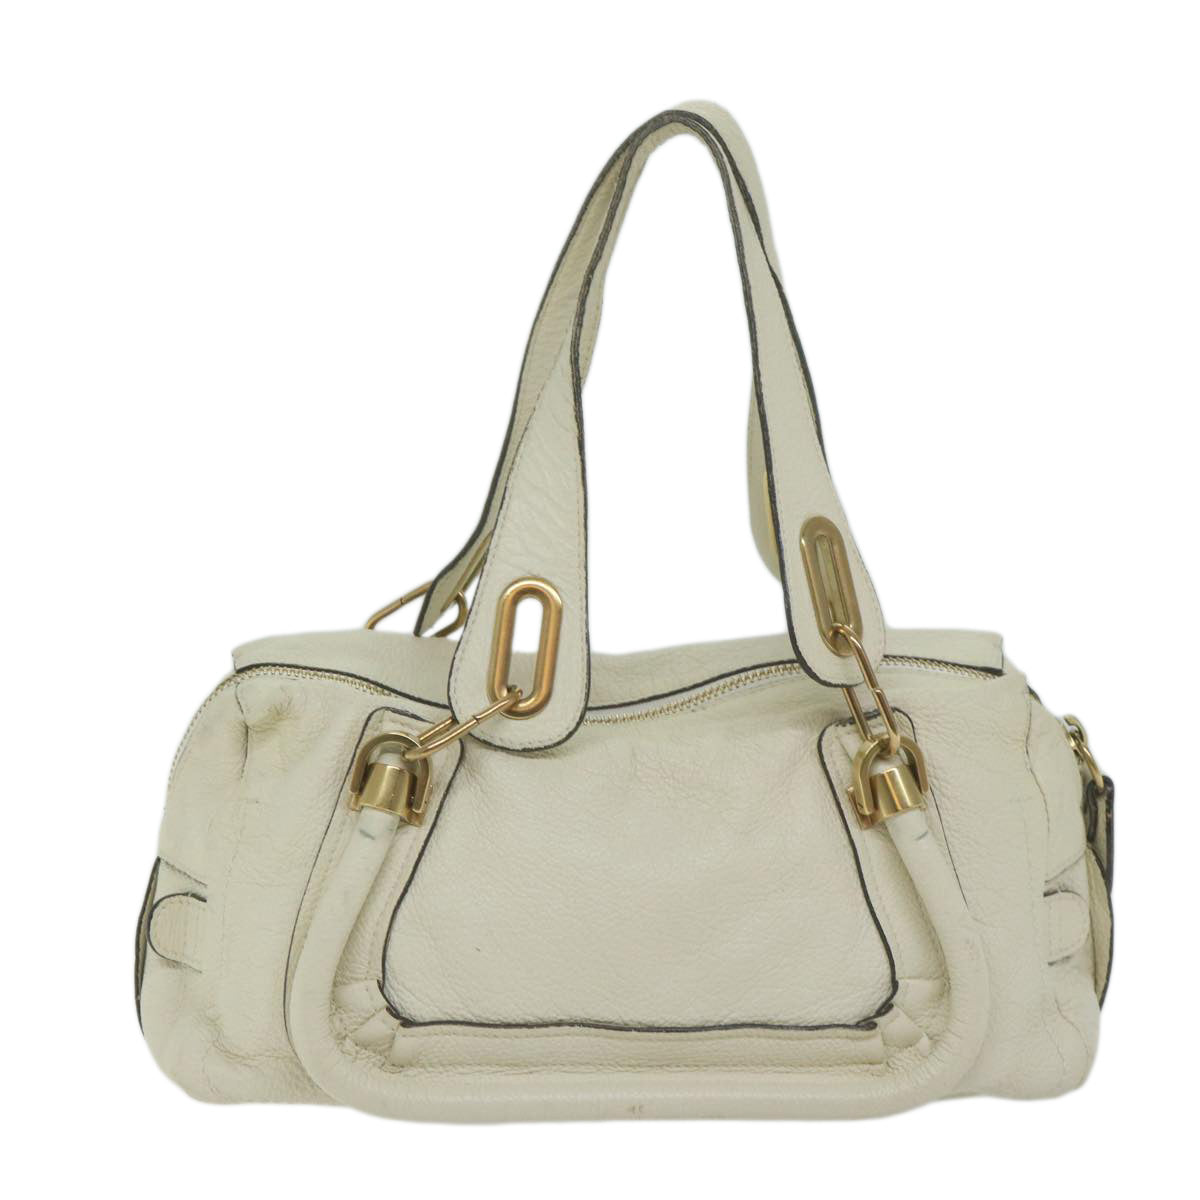 Chloe Paraty Hand Bag Leather White Auth bs11780 - 0